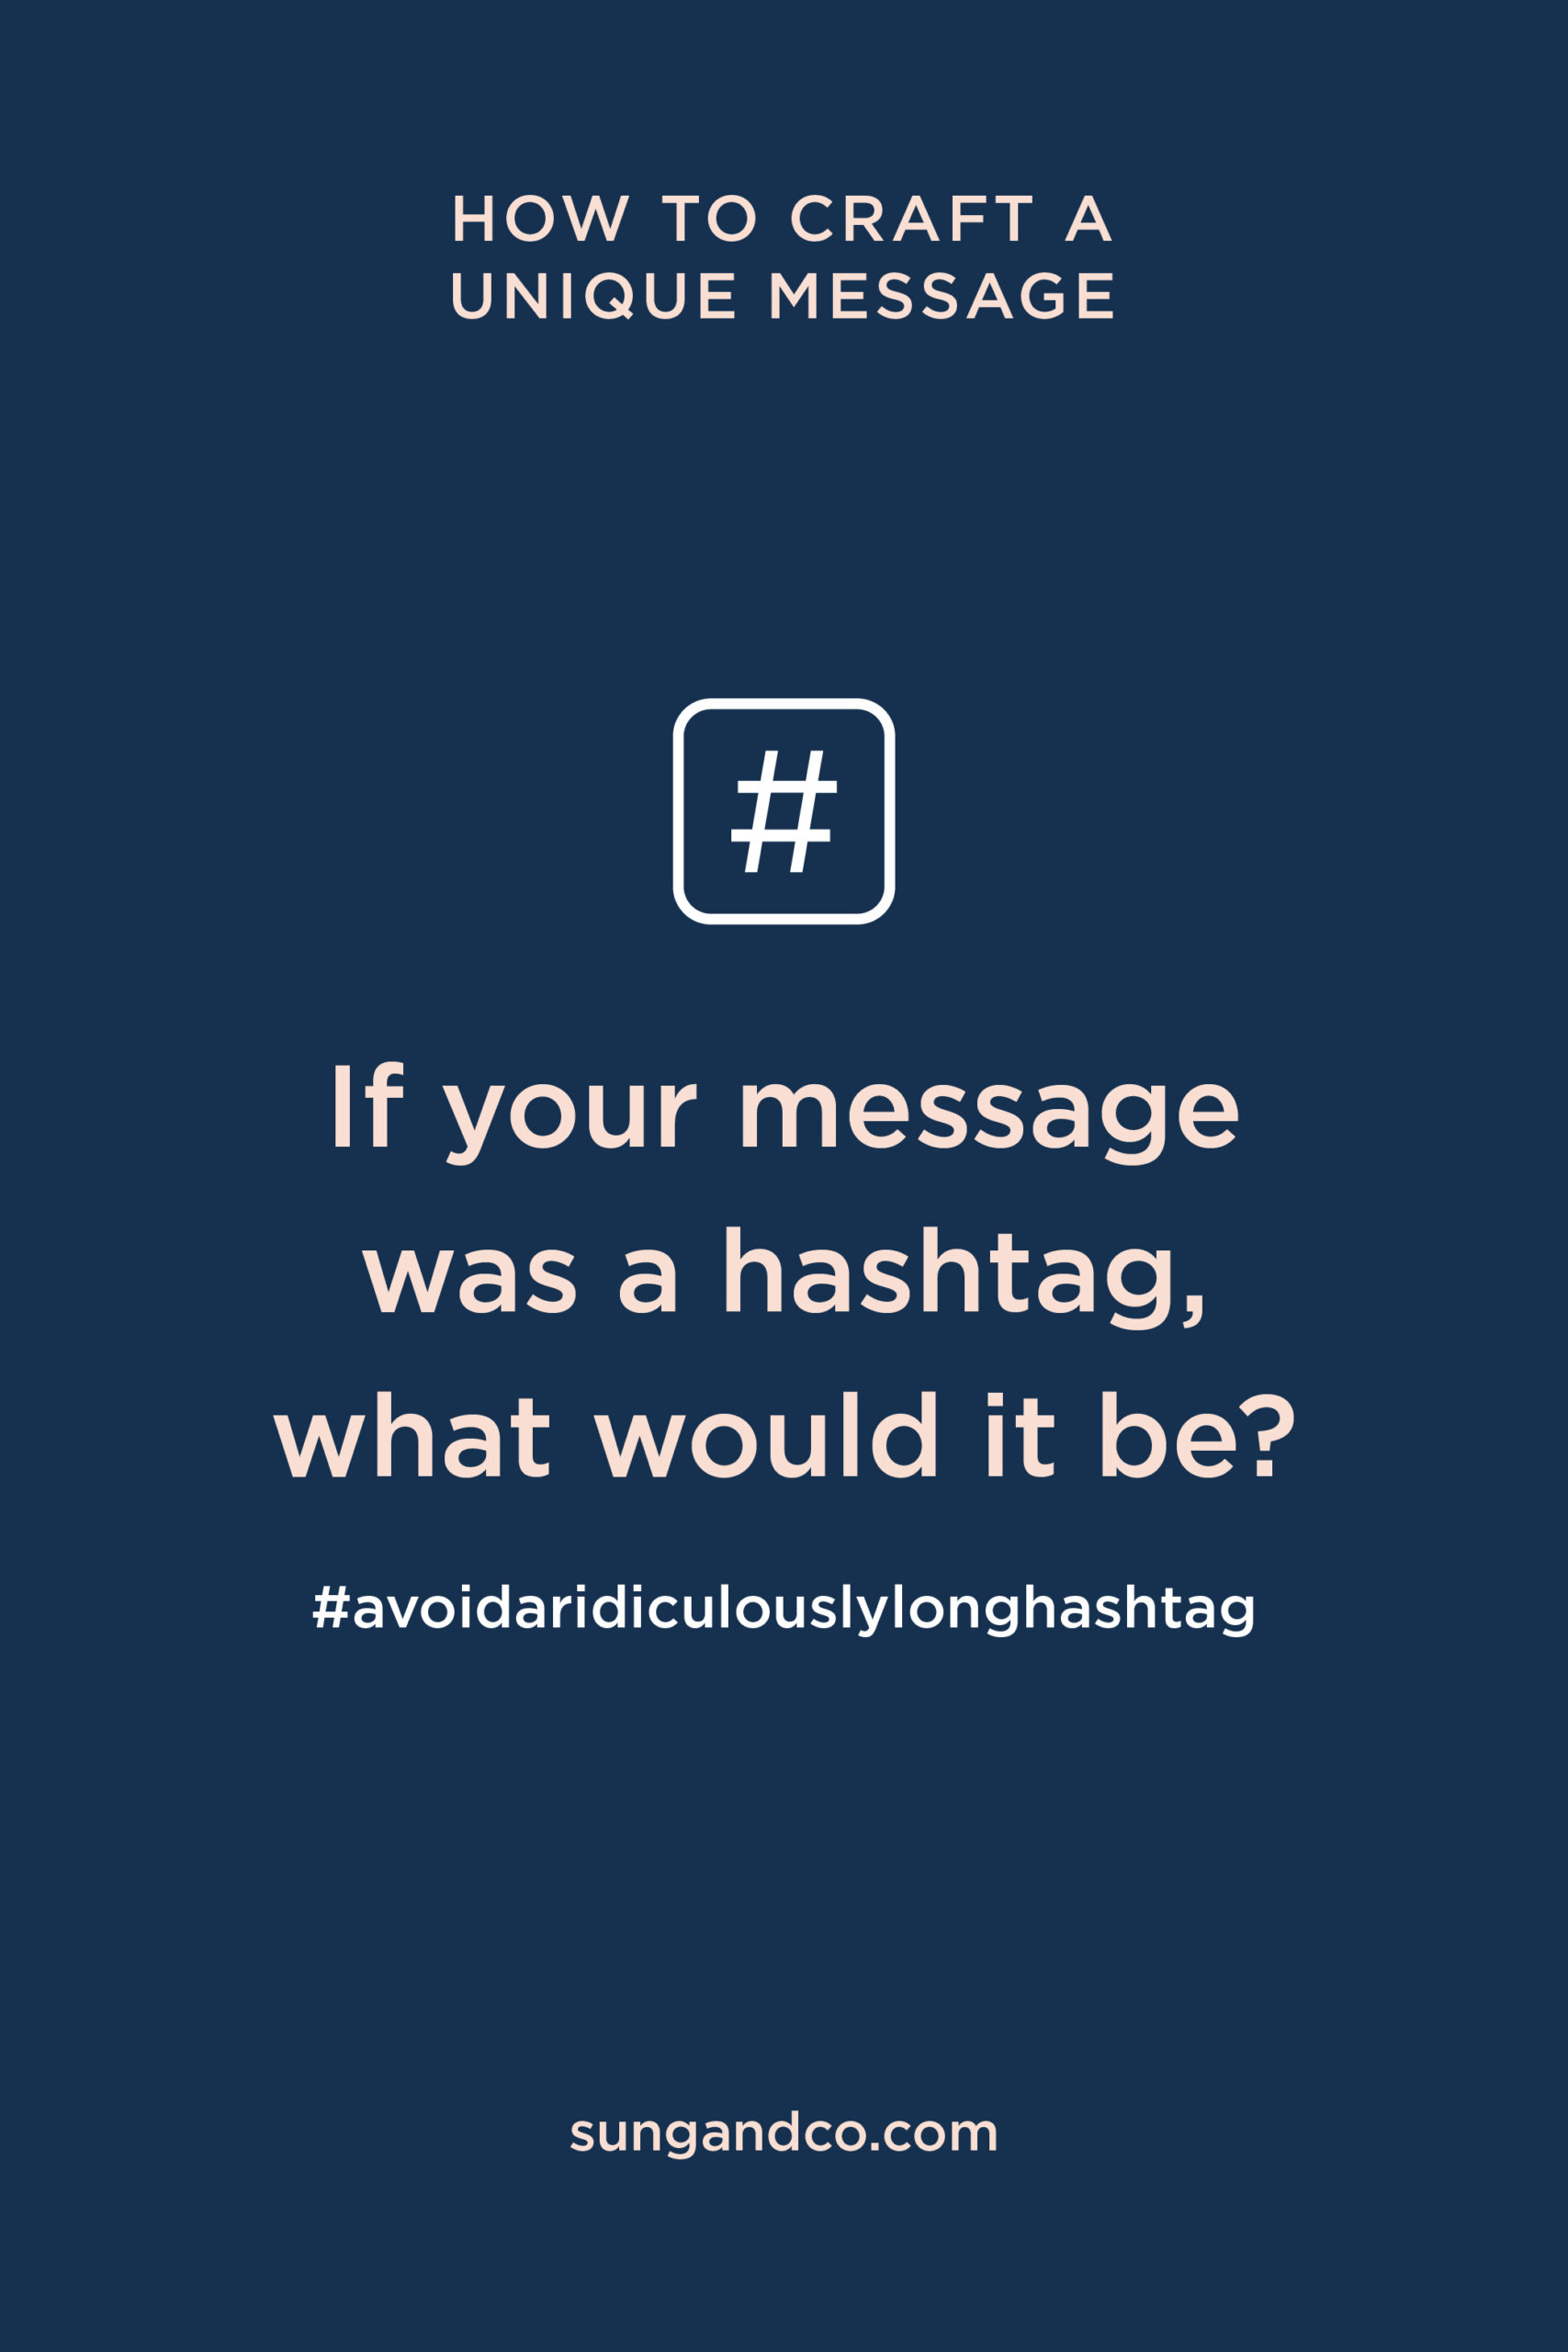 If your brand was a hashtag, what would it be?